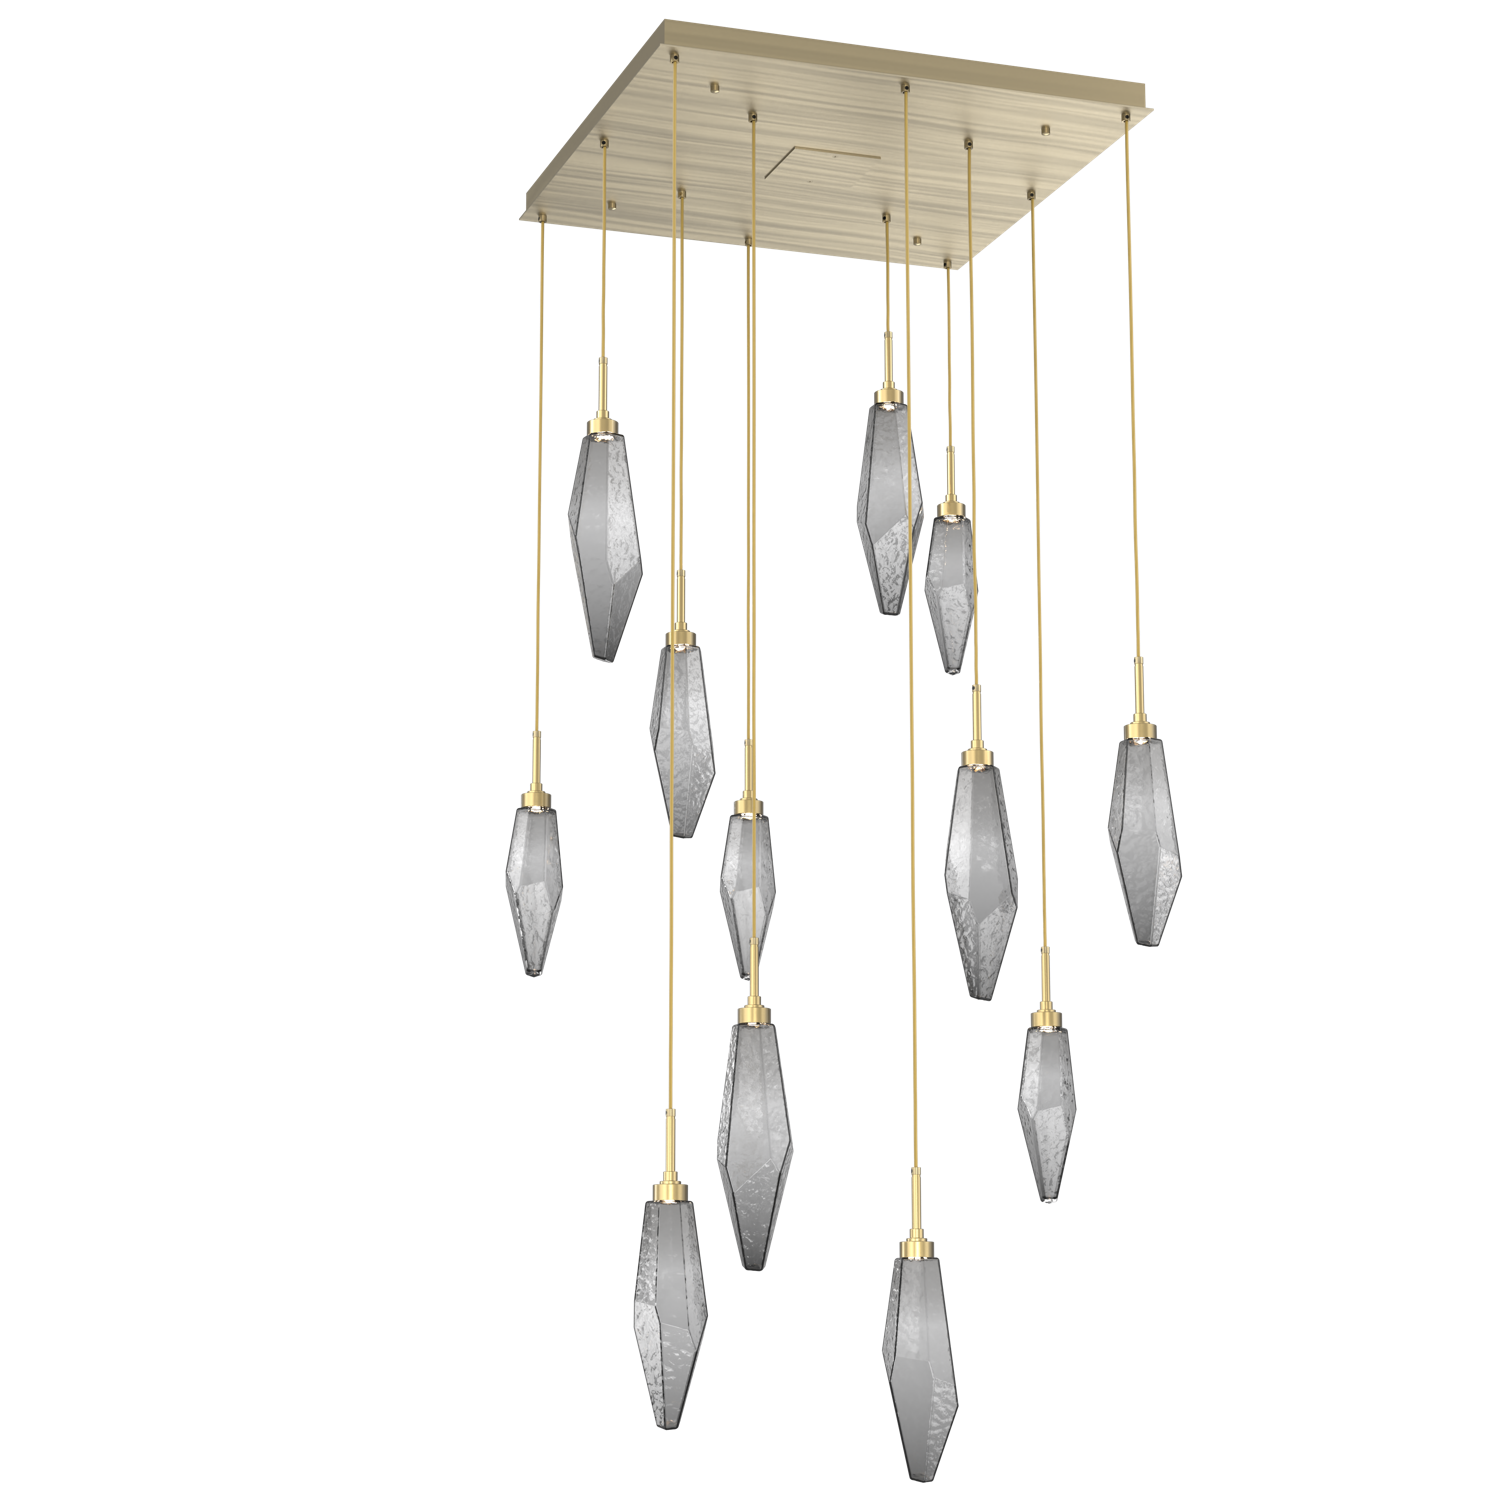 CHB0050-12-HB-CS-Hammerton-Studio-Rock-Crystal-12-light-square-pendant-chandelier-with-heritage-brass-finish-and-chilled-smoke-glass-shades-and-LED-lamping